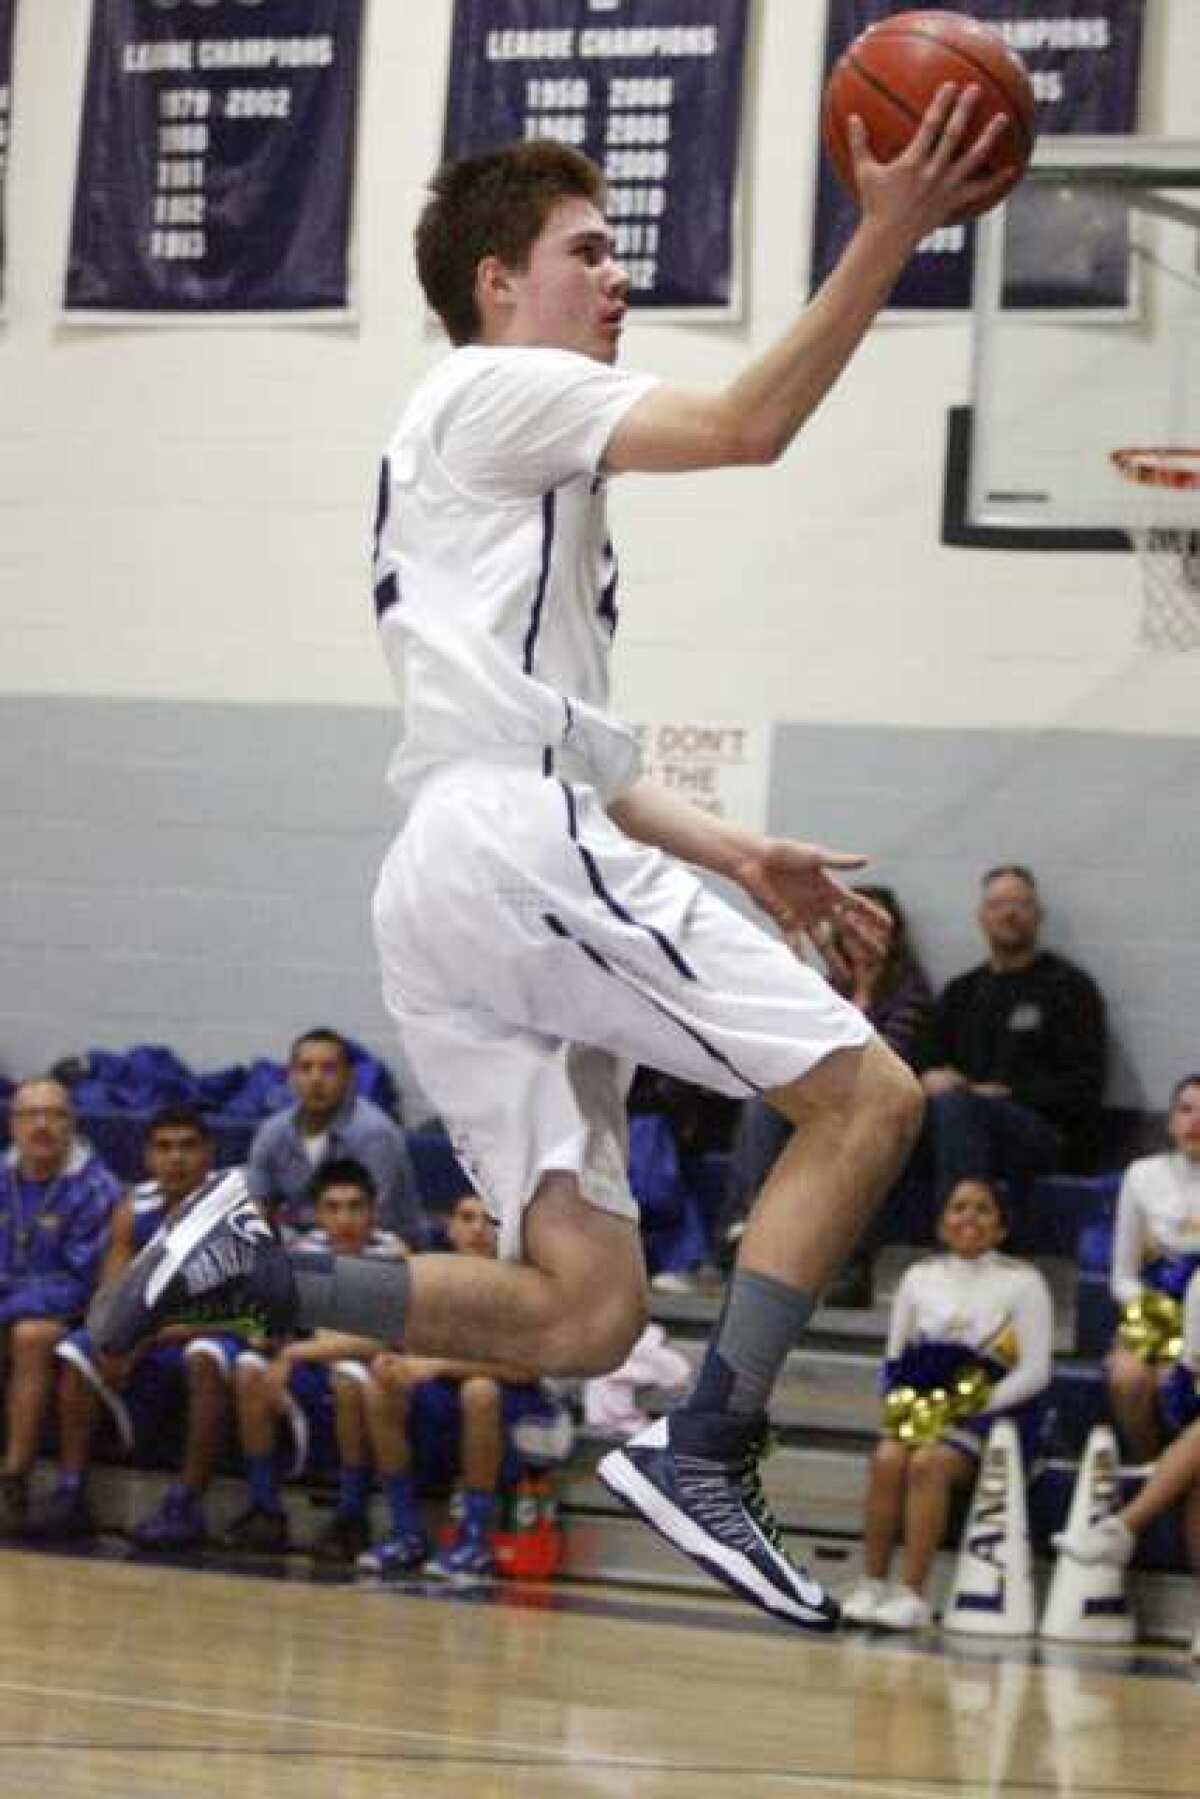 Flintridge Prep's junior guard Robert Cartwright finished with a game-high 22 points for the Rebels.